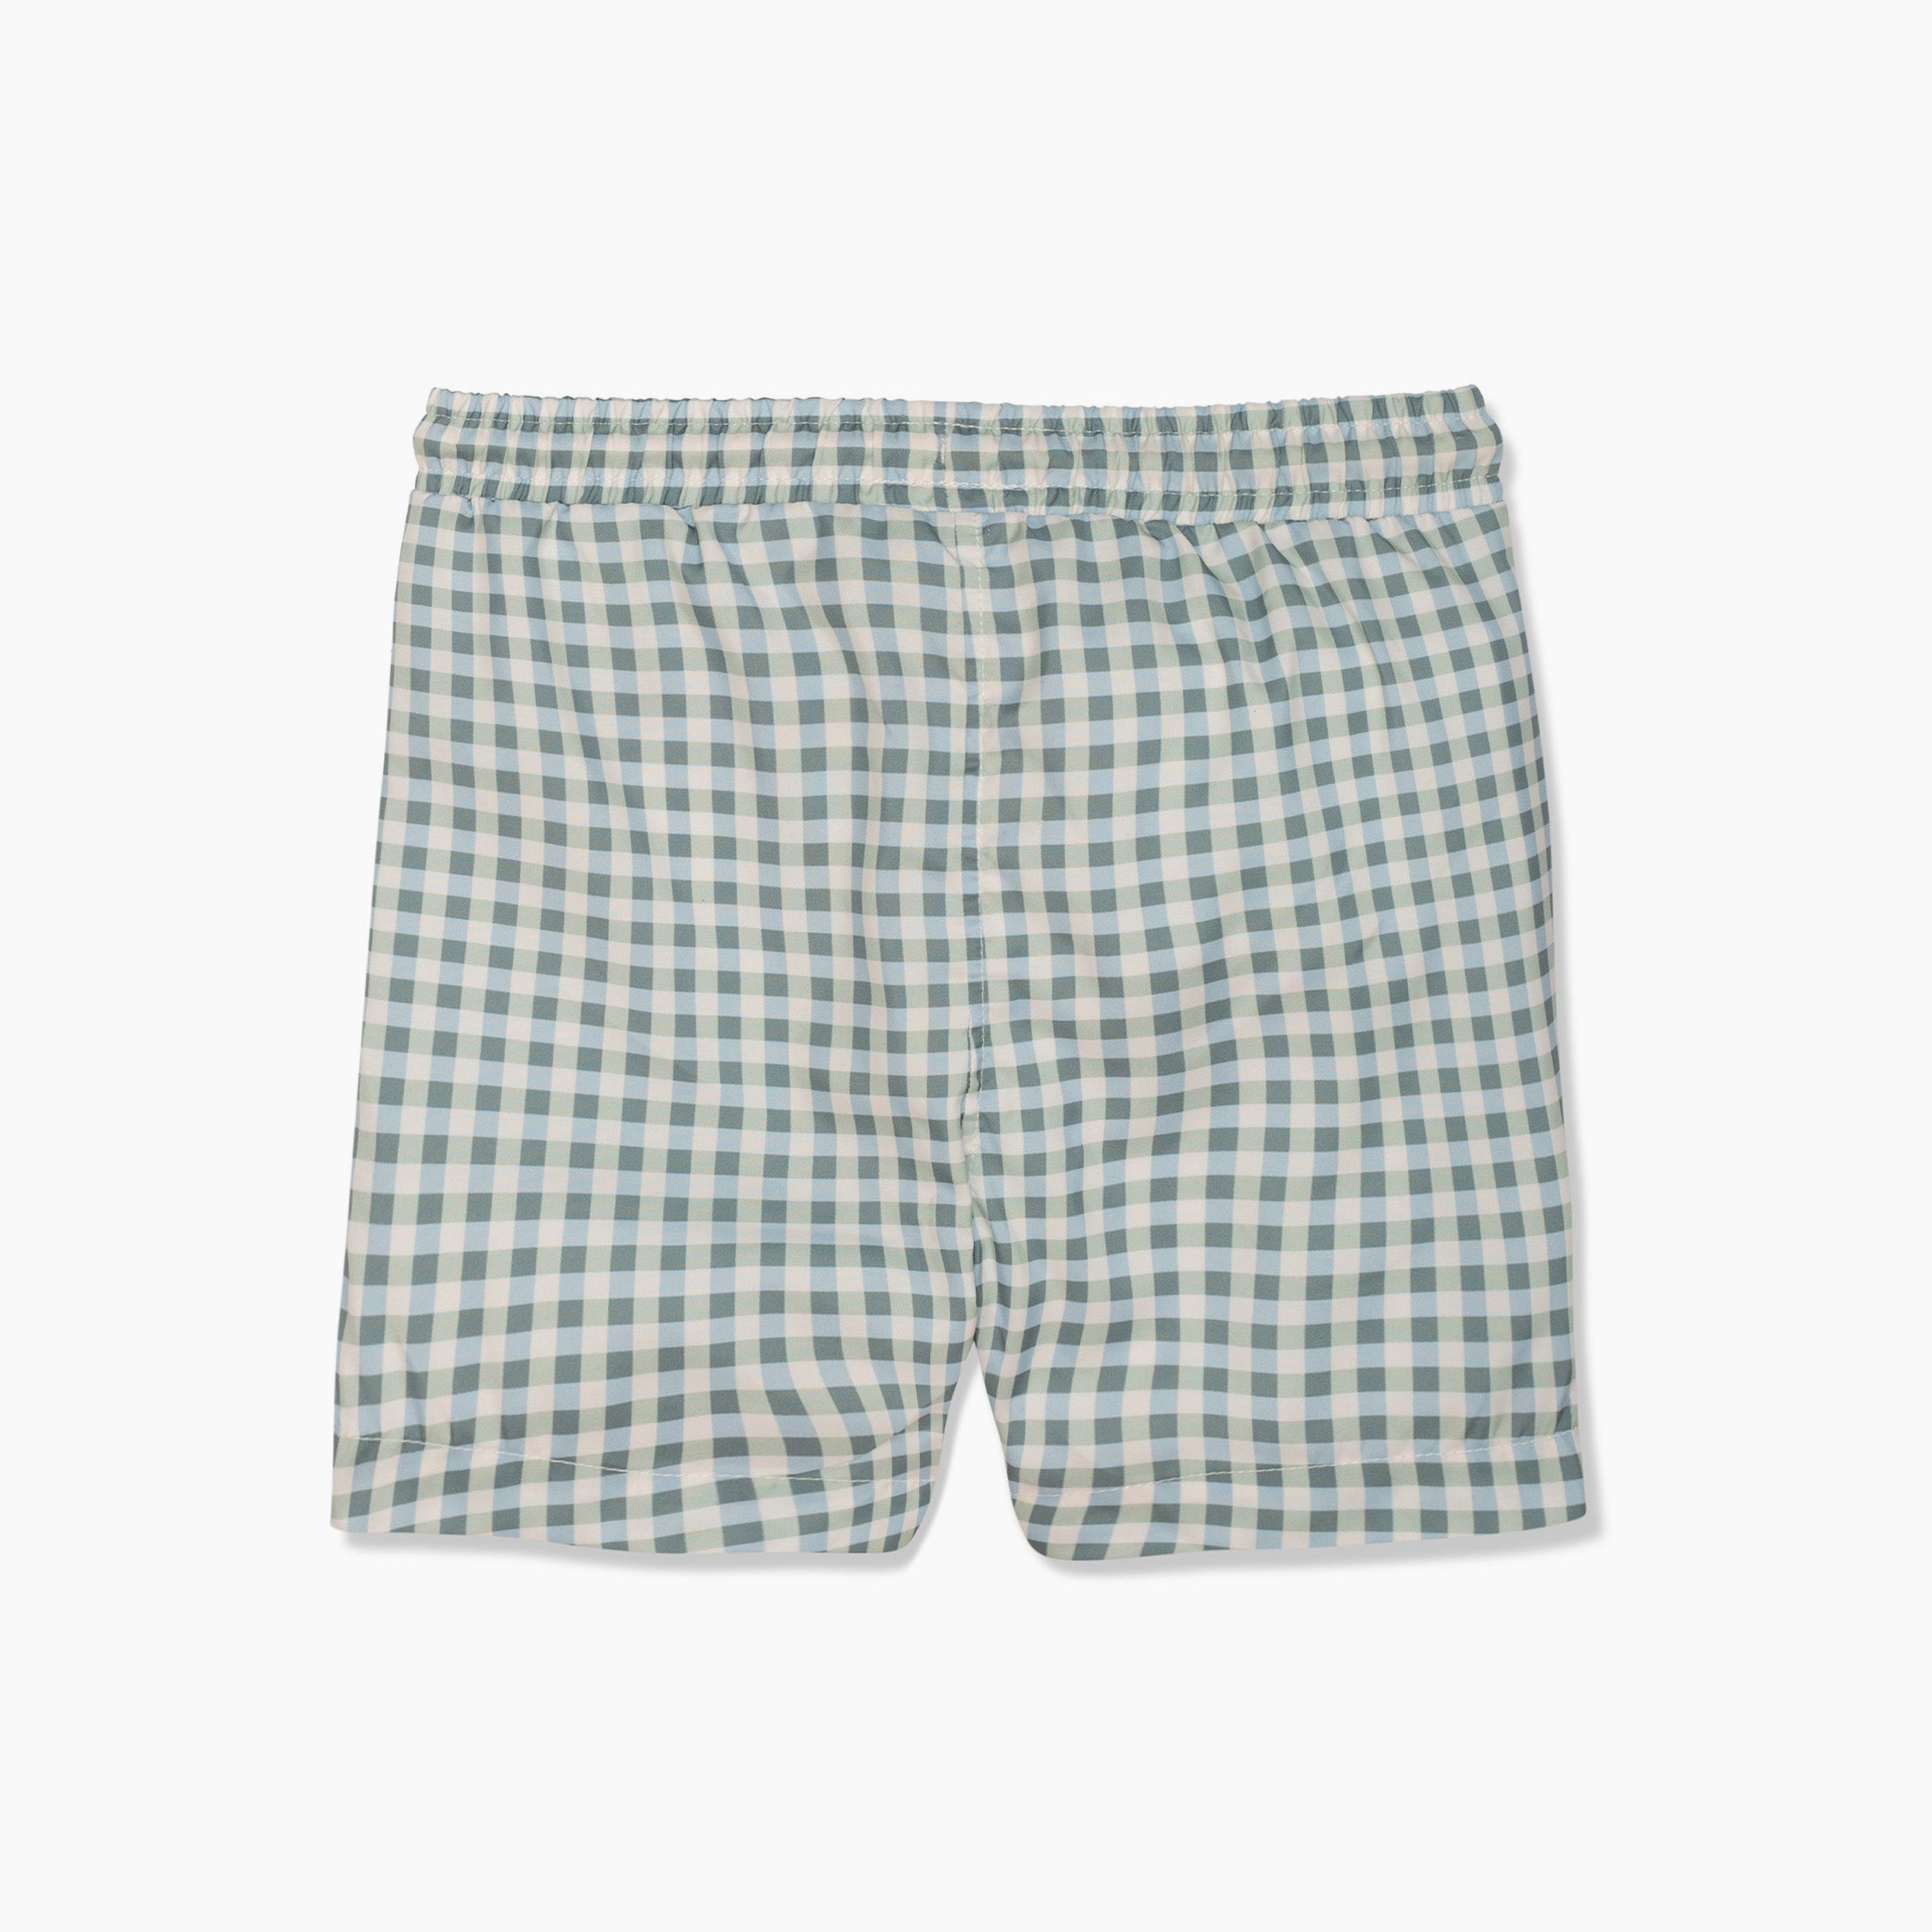 Seaqual Recycled Polyester Blue Gingham Kid Swim Trunks